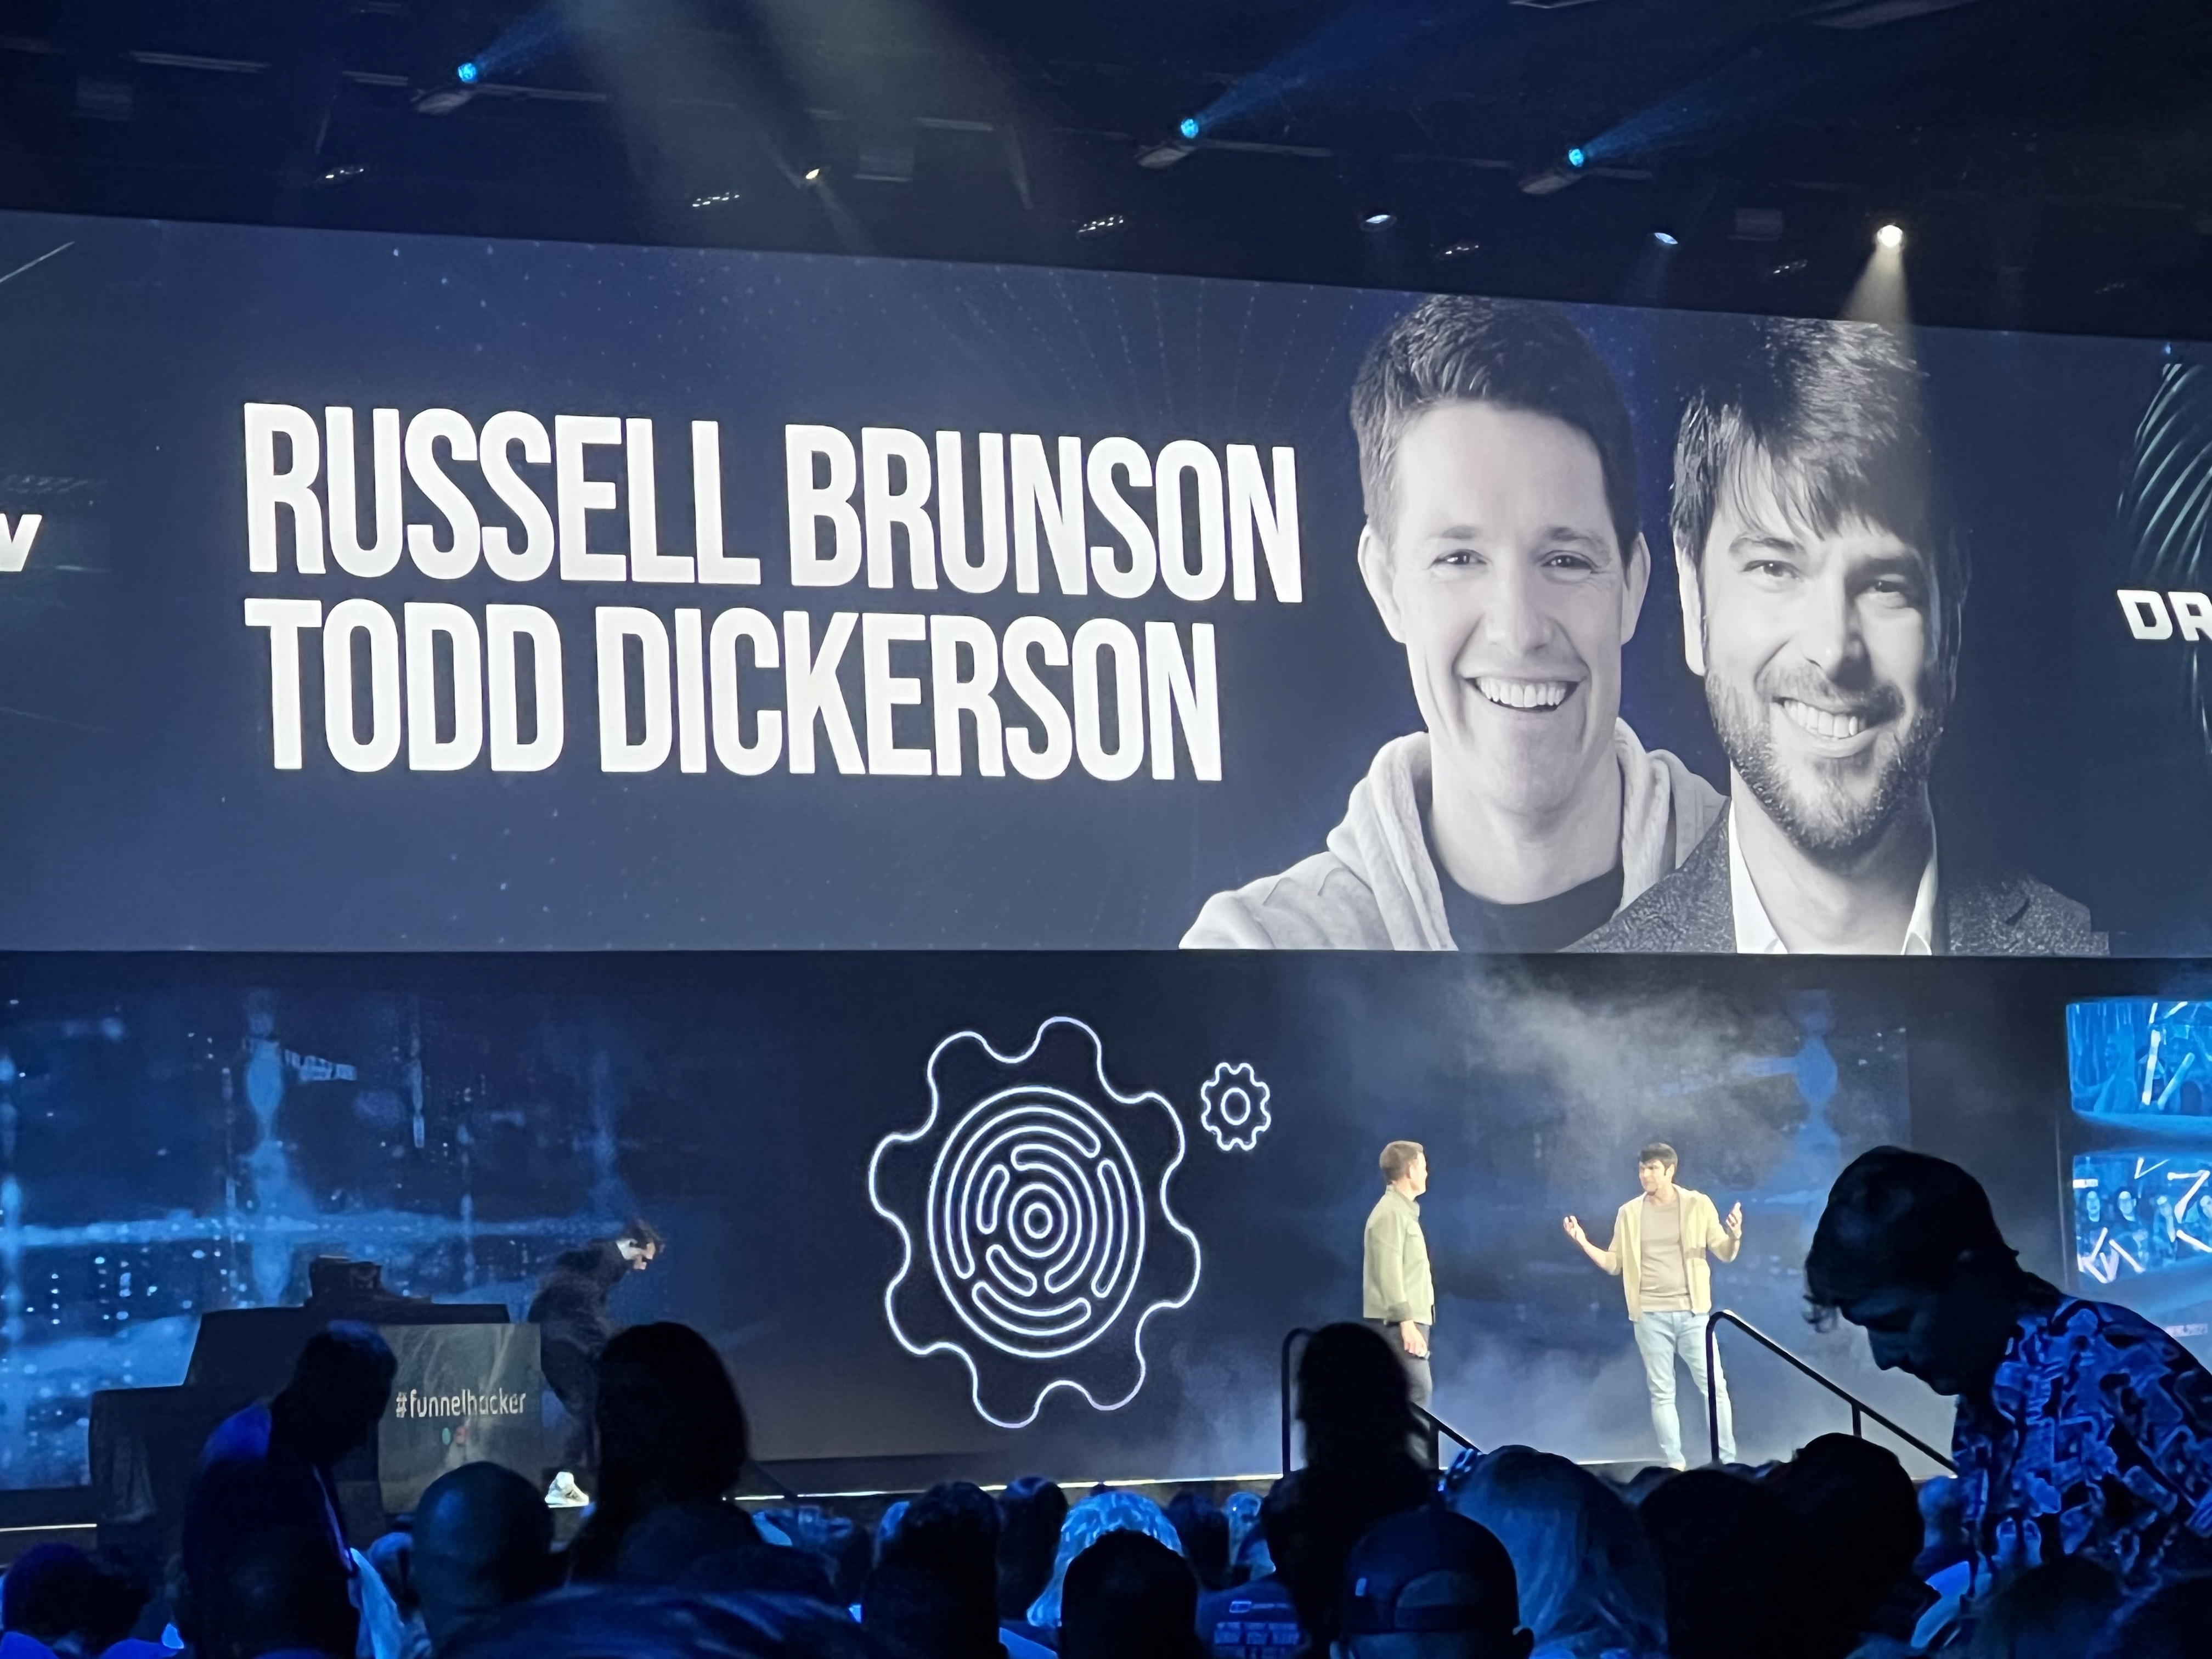 Russell Brunson and Todd Dickerson on stage with a screen advertising them